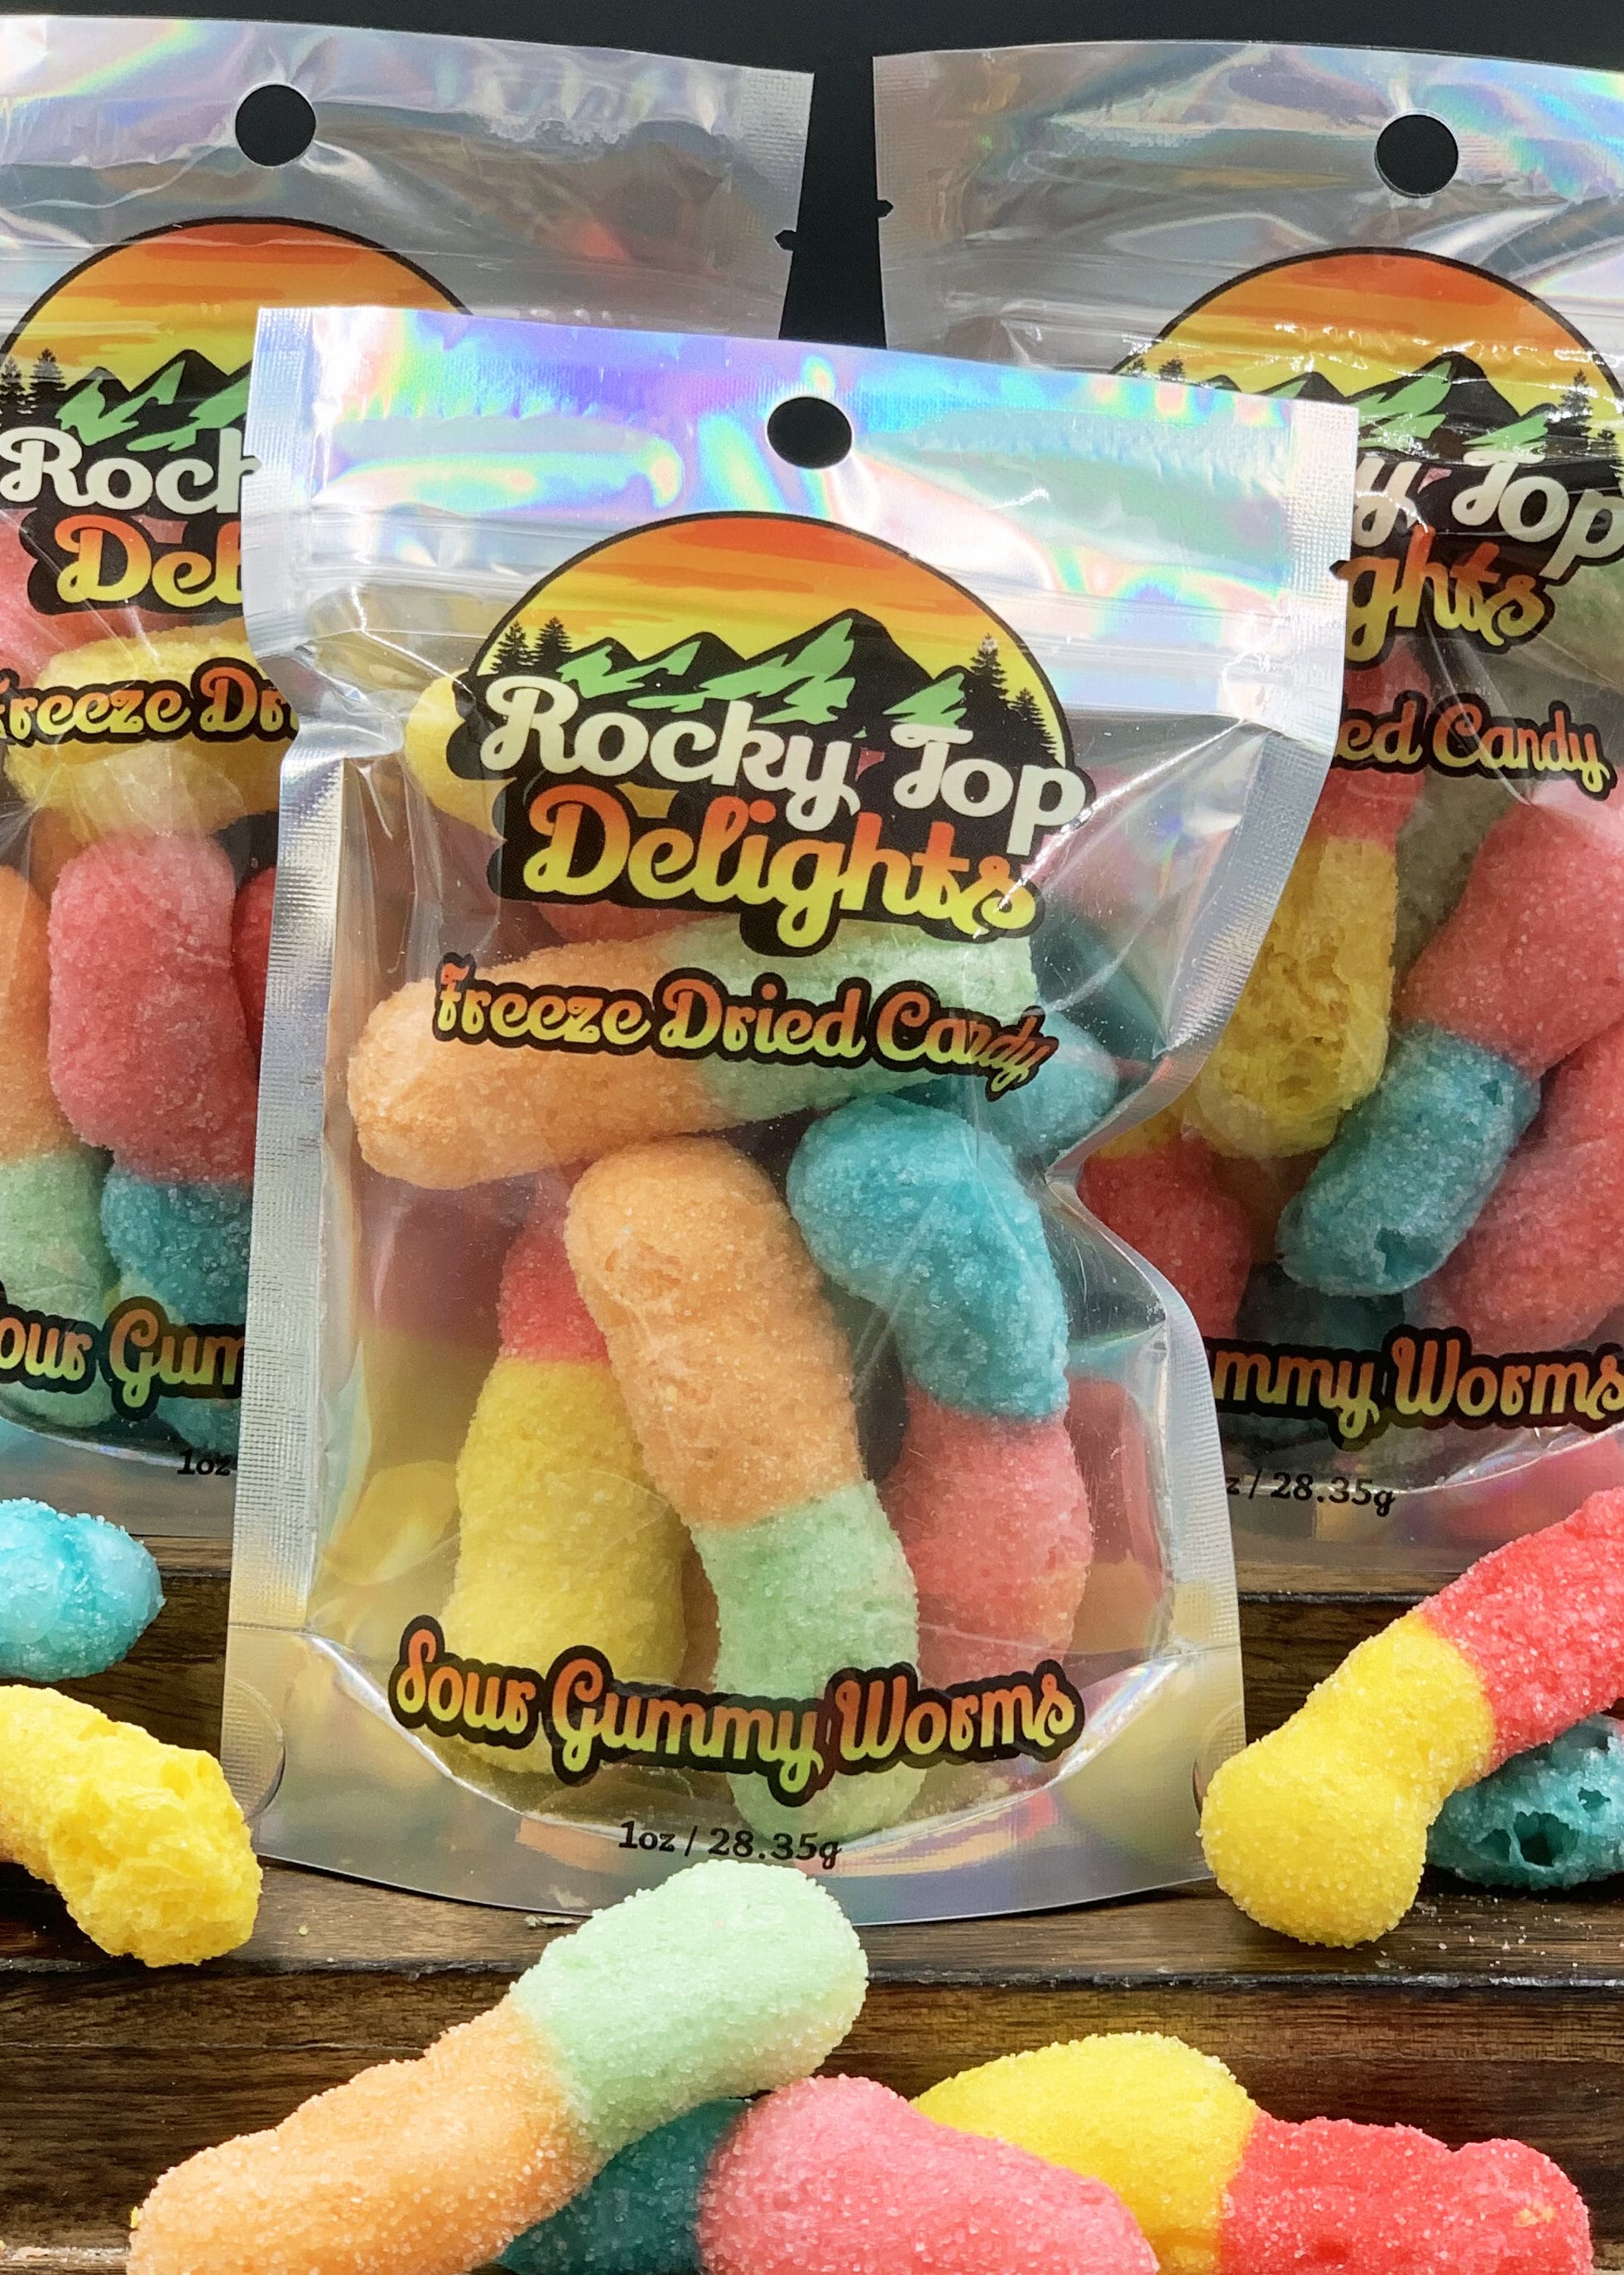 Sour Gummy Worms Freeze Dried Candy